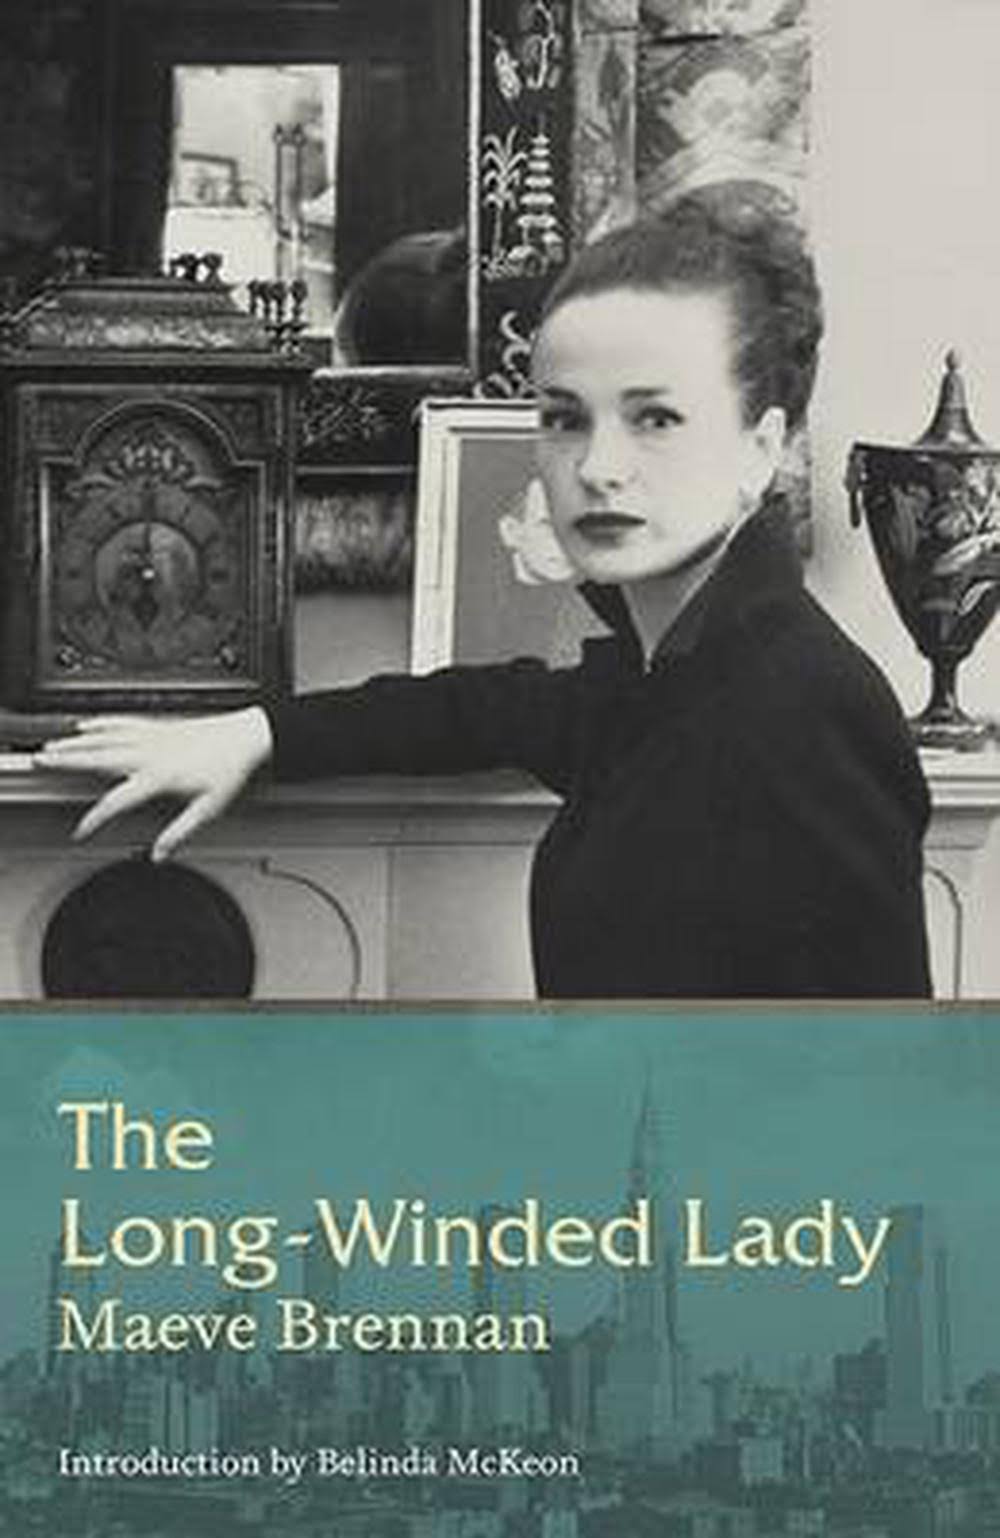 The Long-Winded Lady by Maeve Brennan